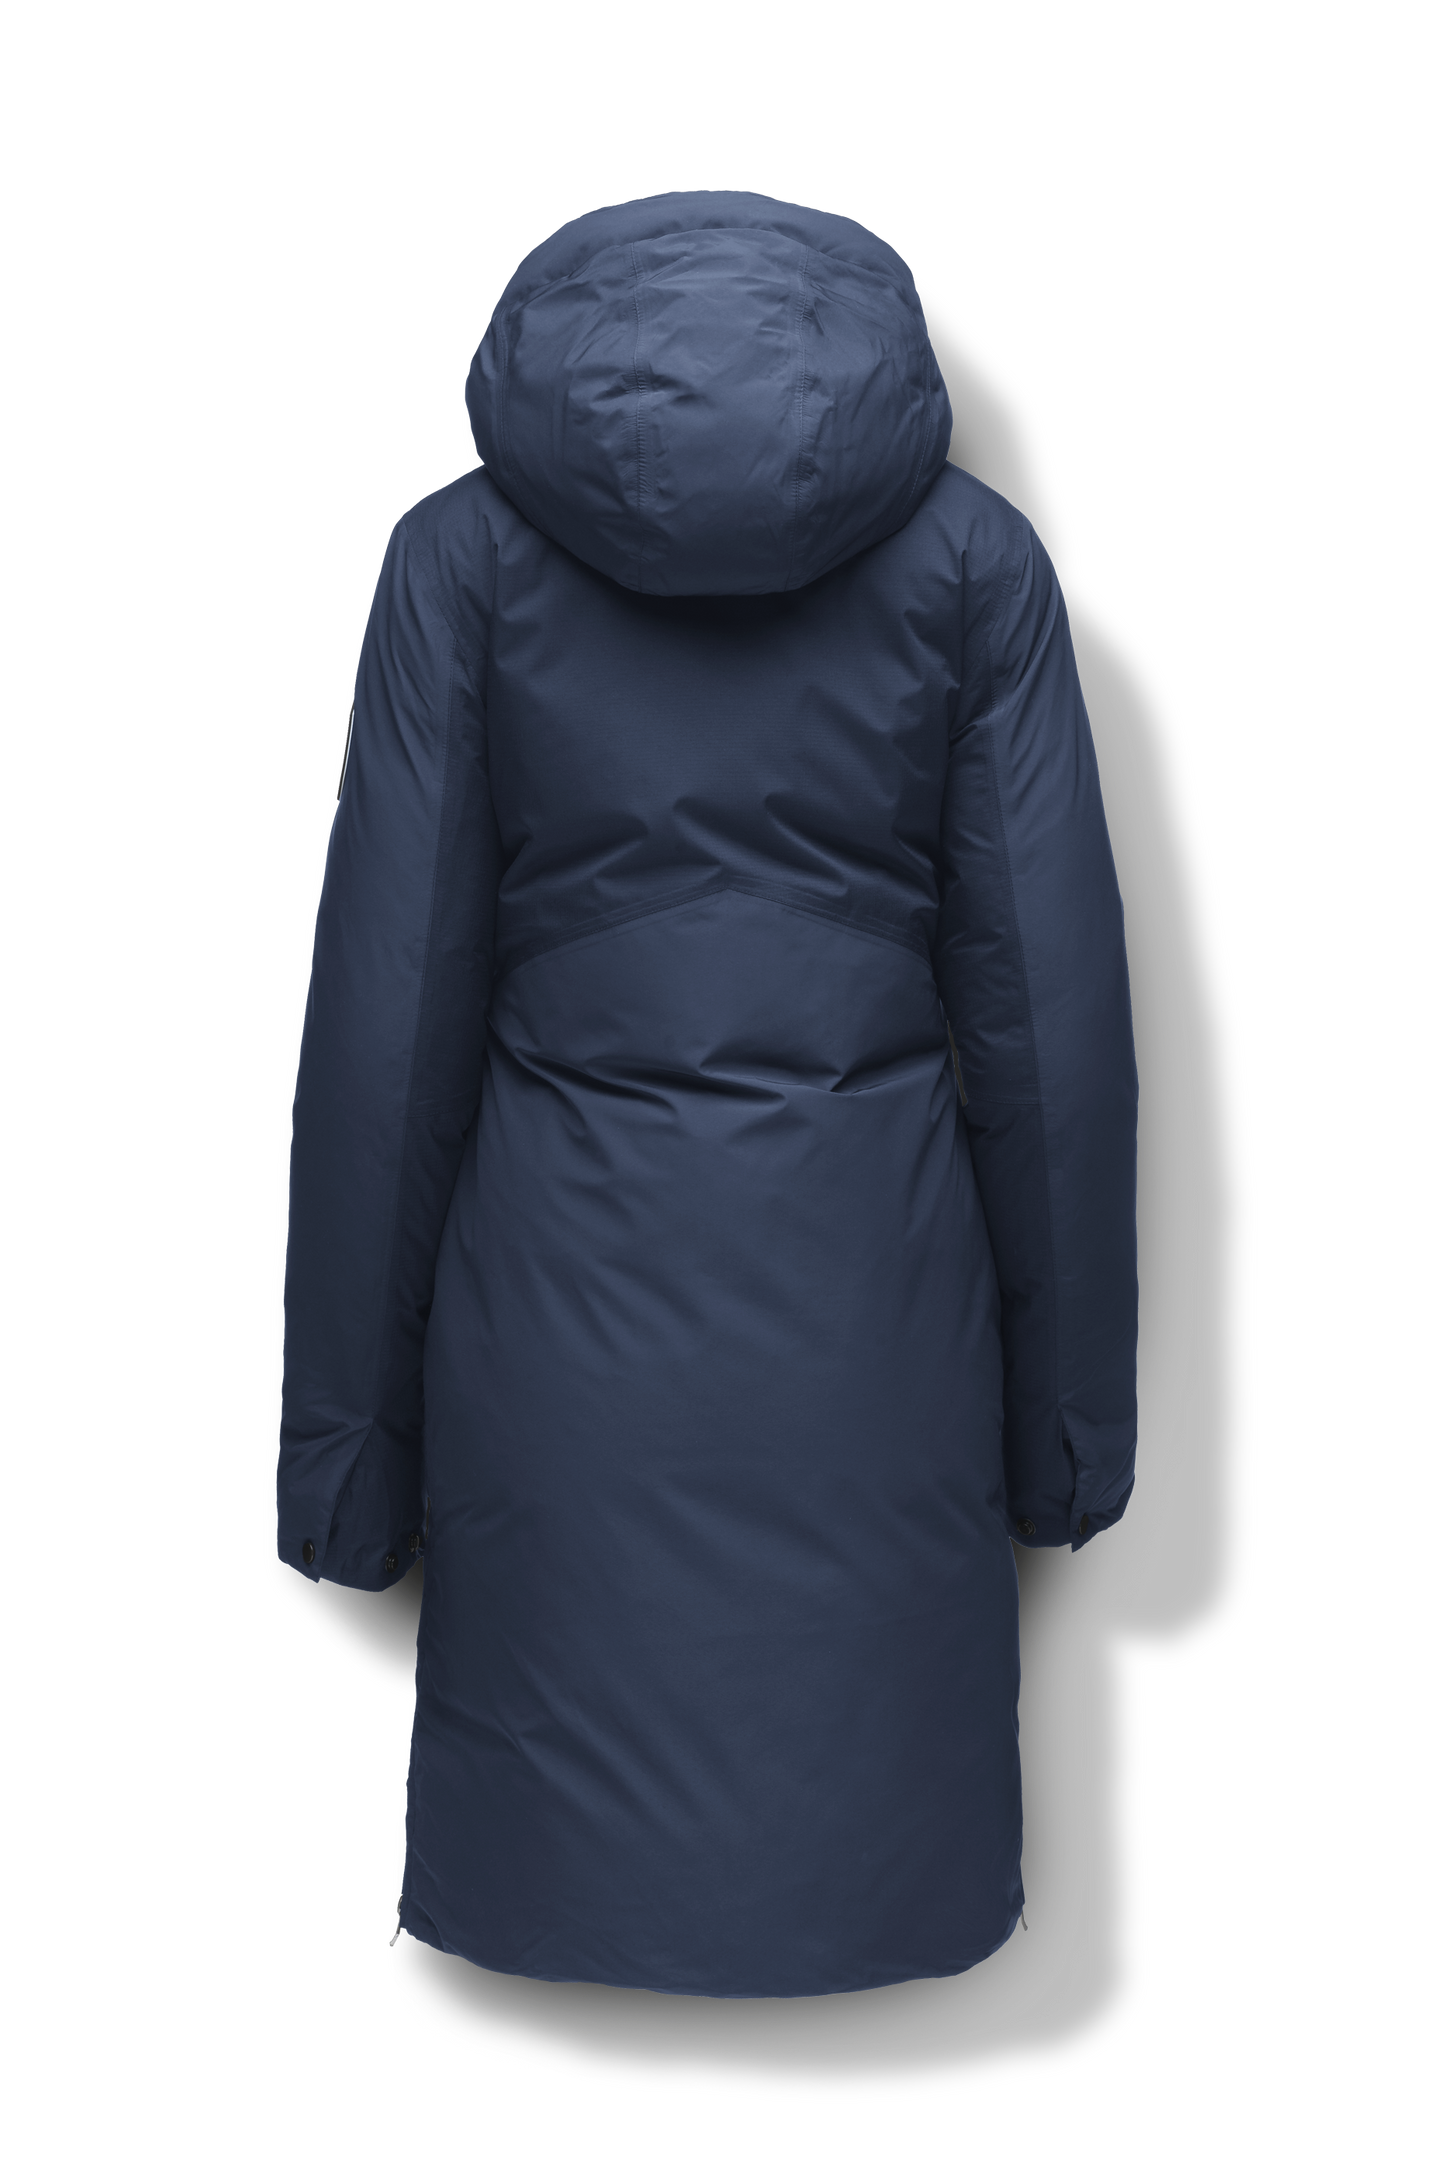 Inara Women's Performance Parka in knee length, premium 3-ply micro denier and stretch ripstop fabrication with DWR coating, Premium Canadian White Duck Down insulation, non-removable down-filled hood, centre front two-way zipper, large vertical zipper pockets along waist, zipper vents along bottom side hem, in Marine